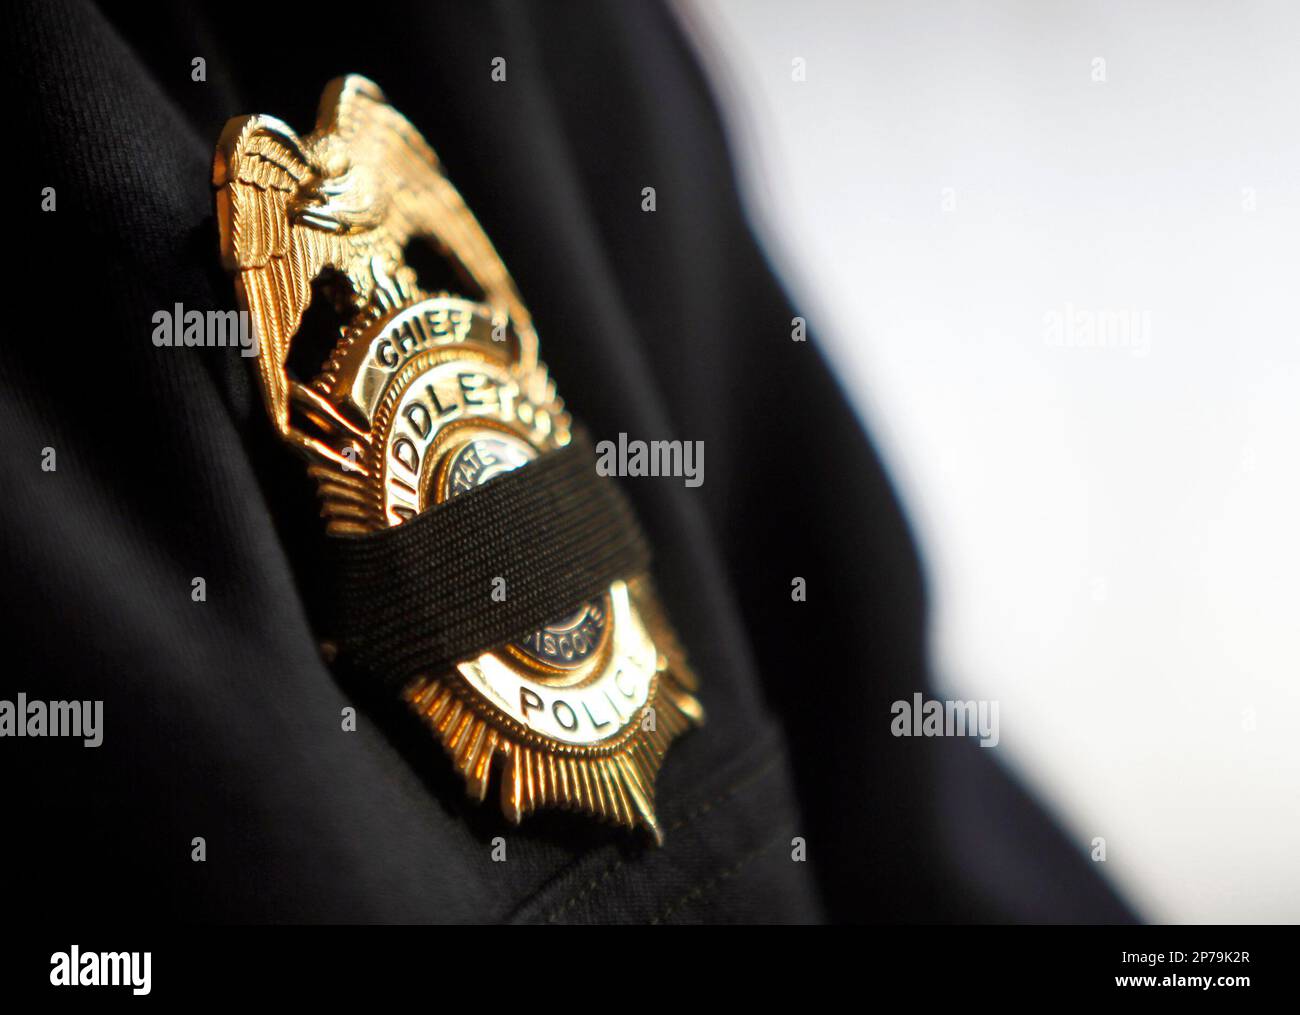 A black mourning band covers the badge of Middleton Police chief Brad Keil  before a funeral Mass for Sgt. Thomas J. Baitinger at St. Bernard Catholic  Parish in Middleton, Wis., Friday afternoon,